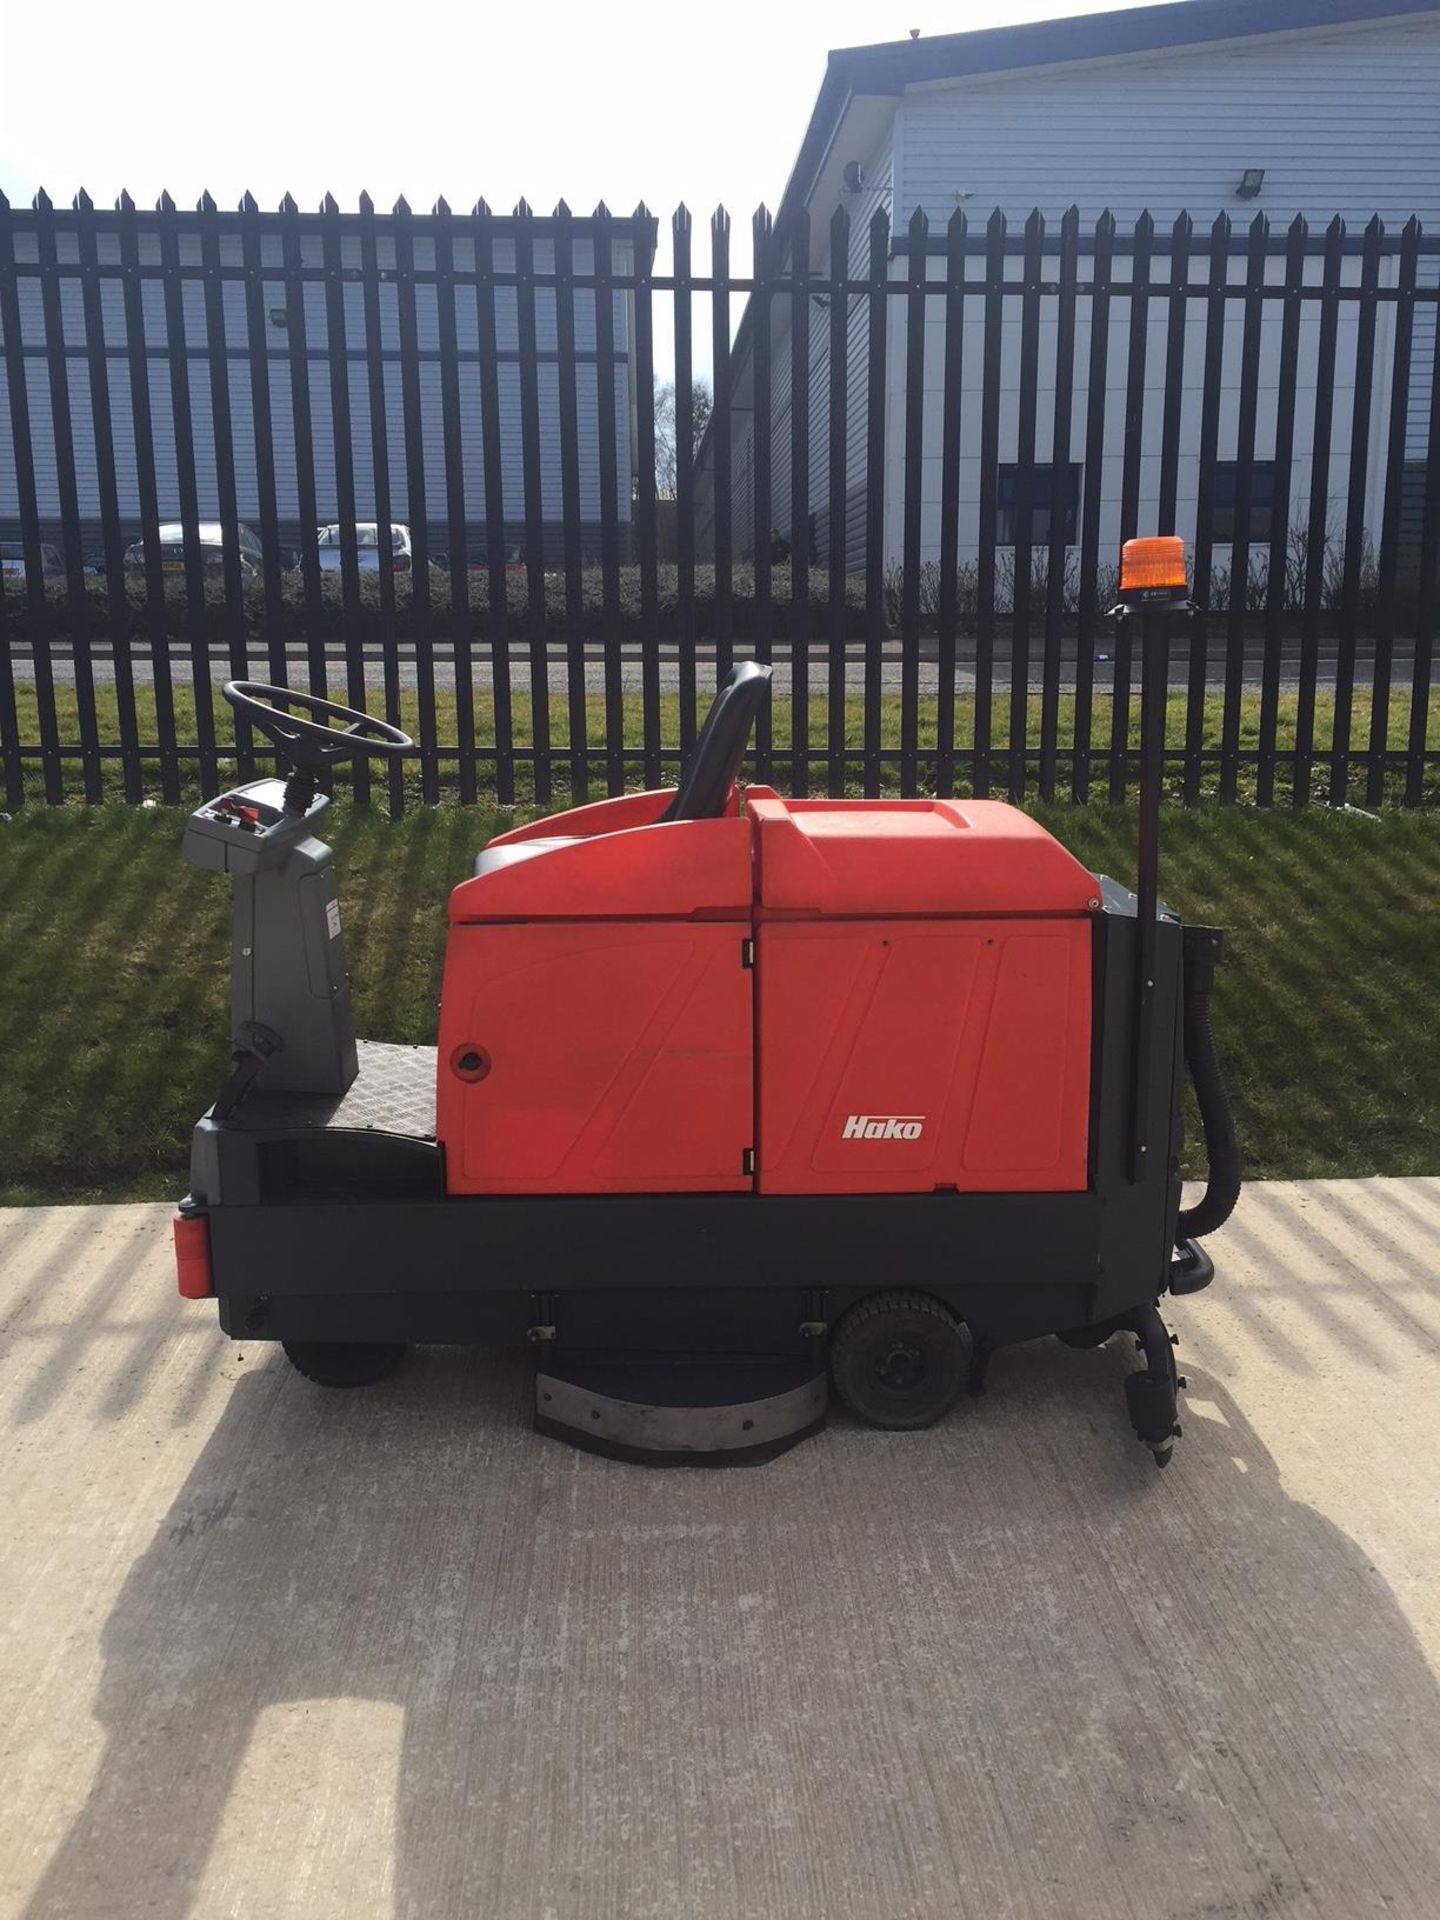 Hako Ride On Floor Cleaner Scrubber Drier - Image 5 of 5